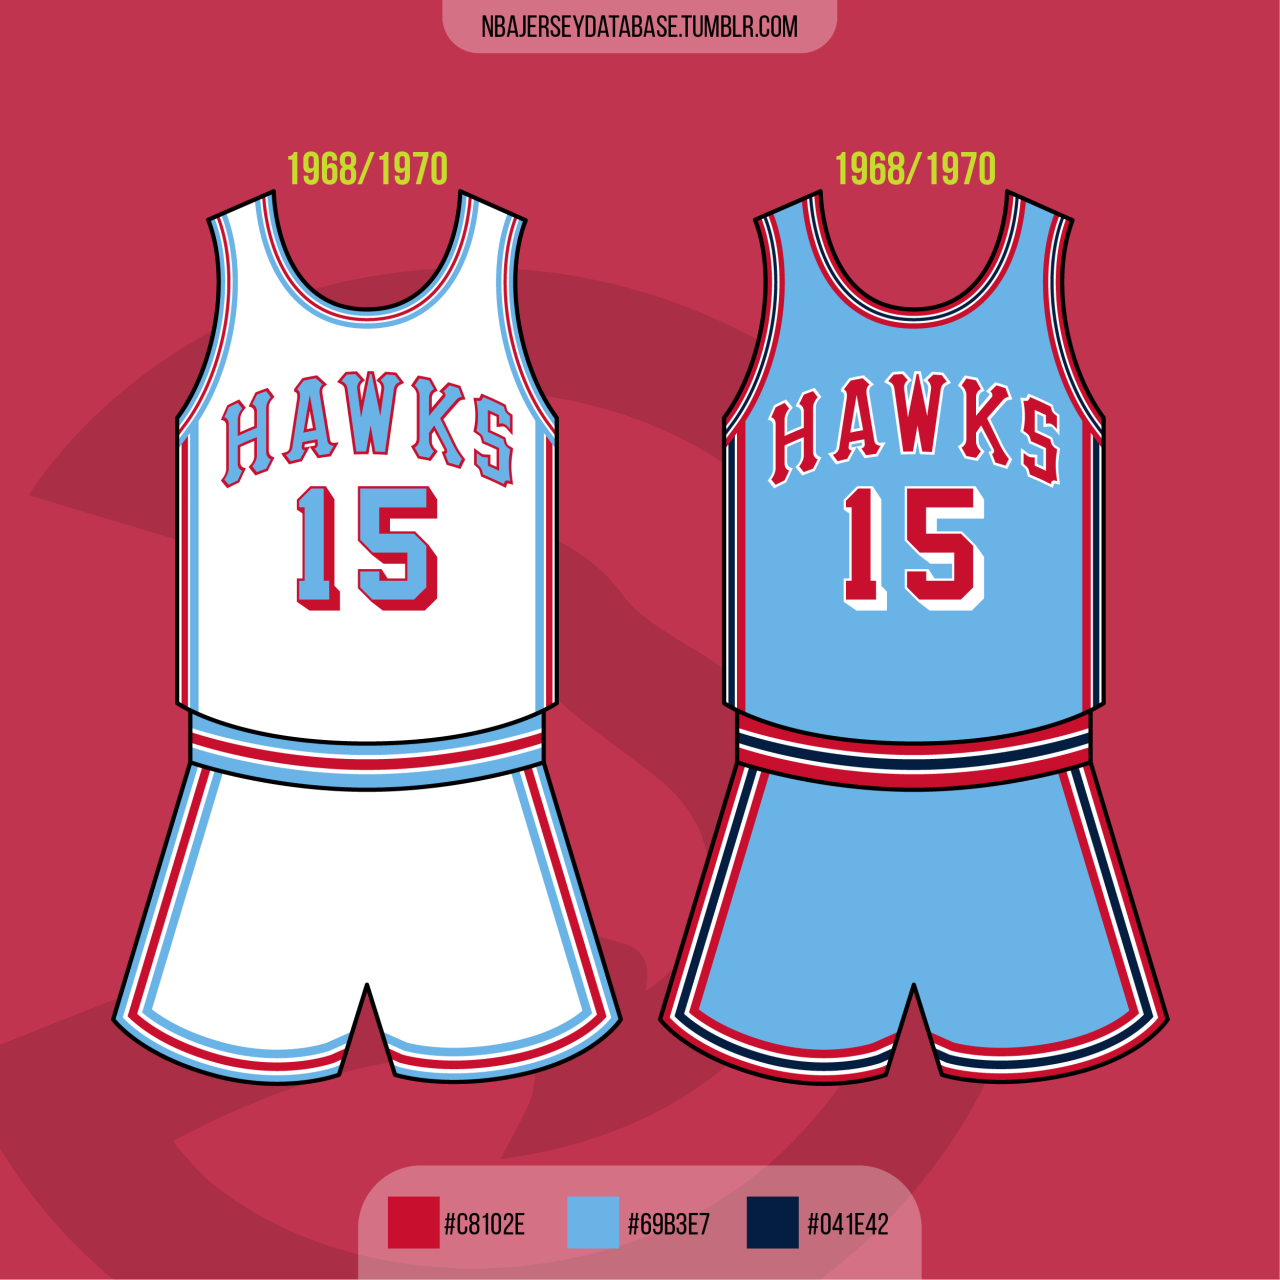 Atlanta Hawks unveil new uniforms featuring red, black and 'volt green' 